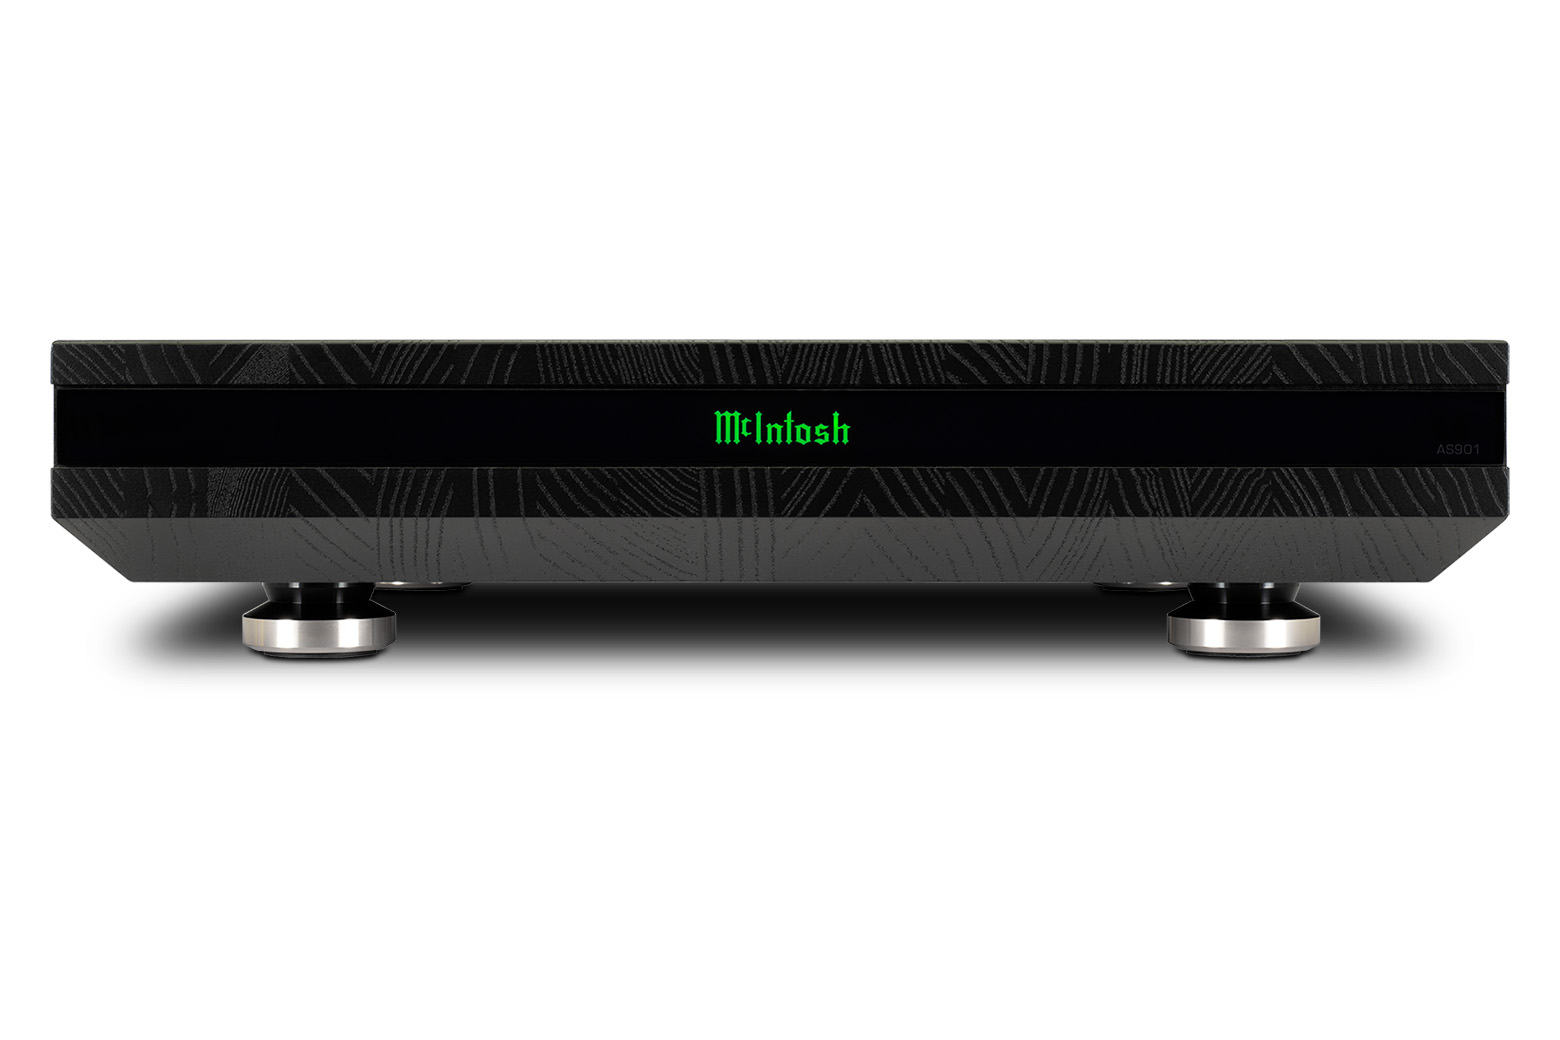 McIntosh AS901 Amplifier Stand